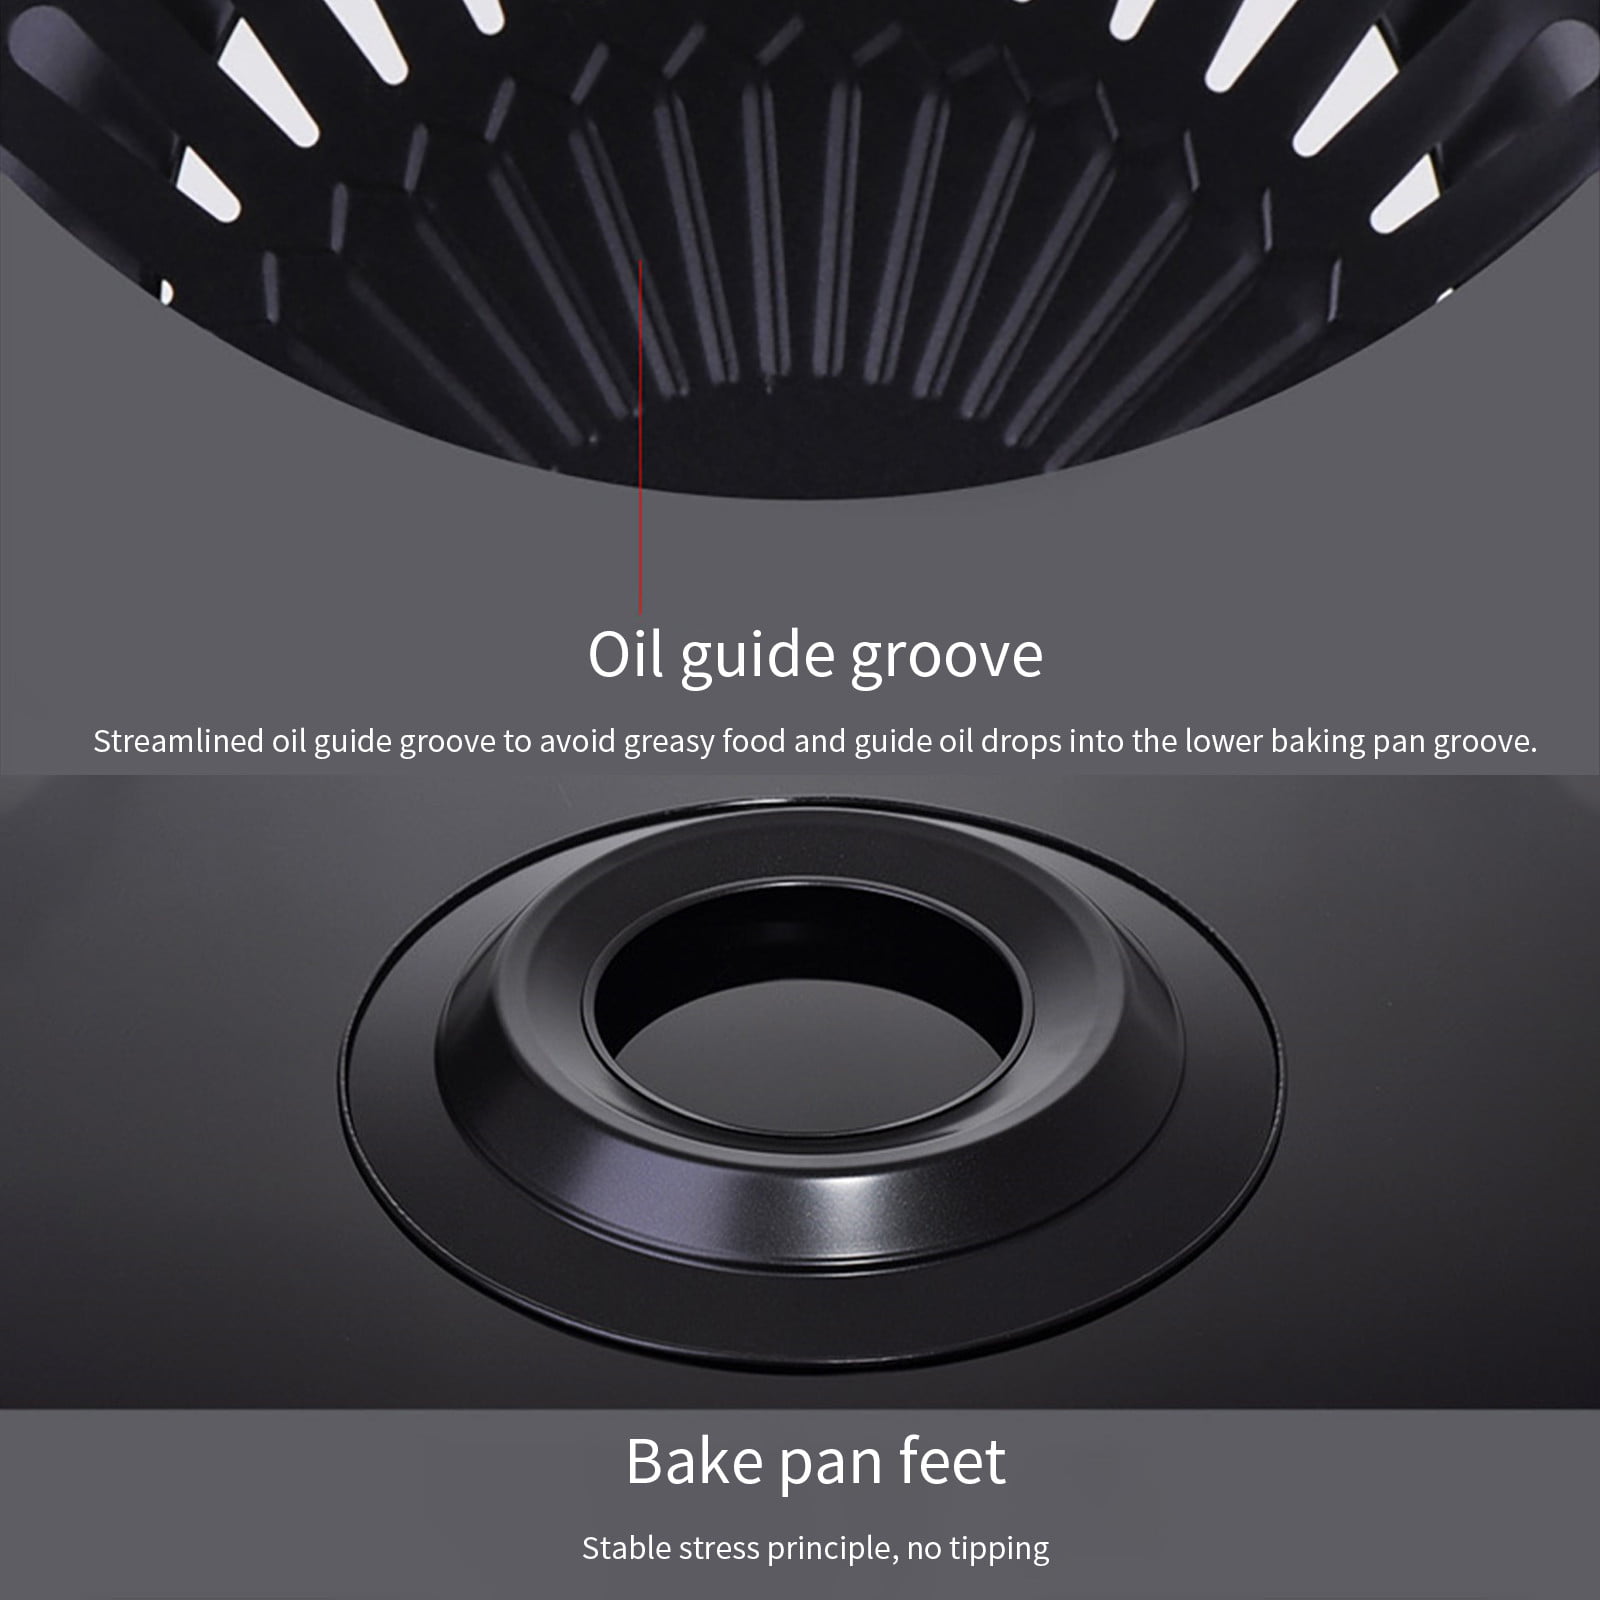 Round Stainless Steel Korean BBQ Grill Plate Barbecue Set Non-stick Pan Set  With Holder